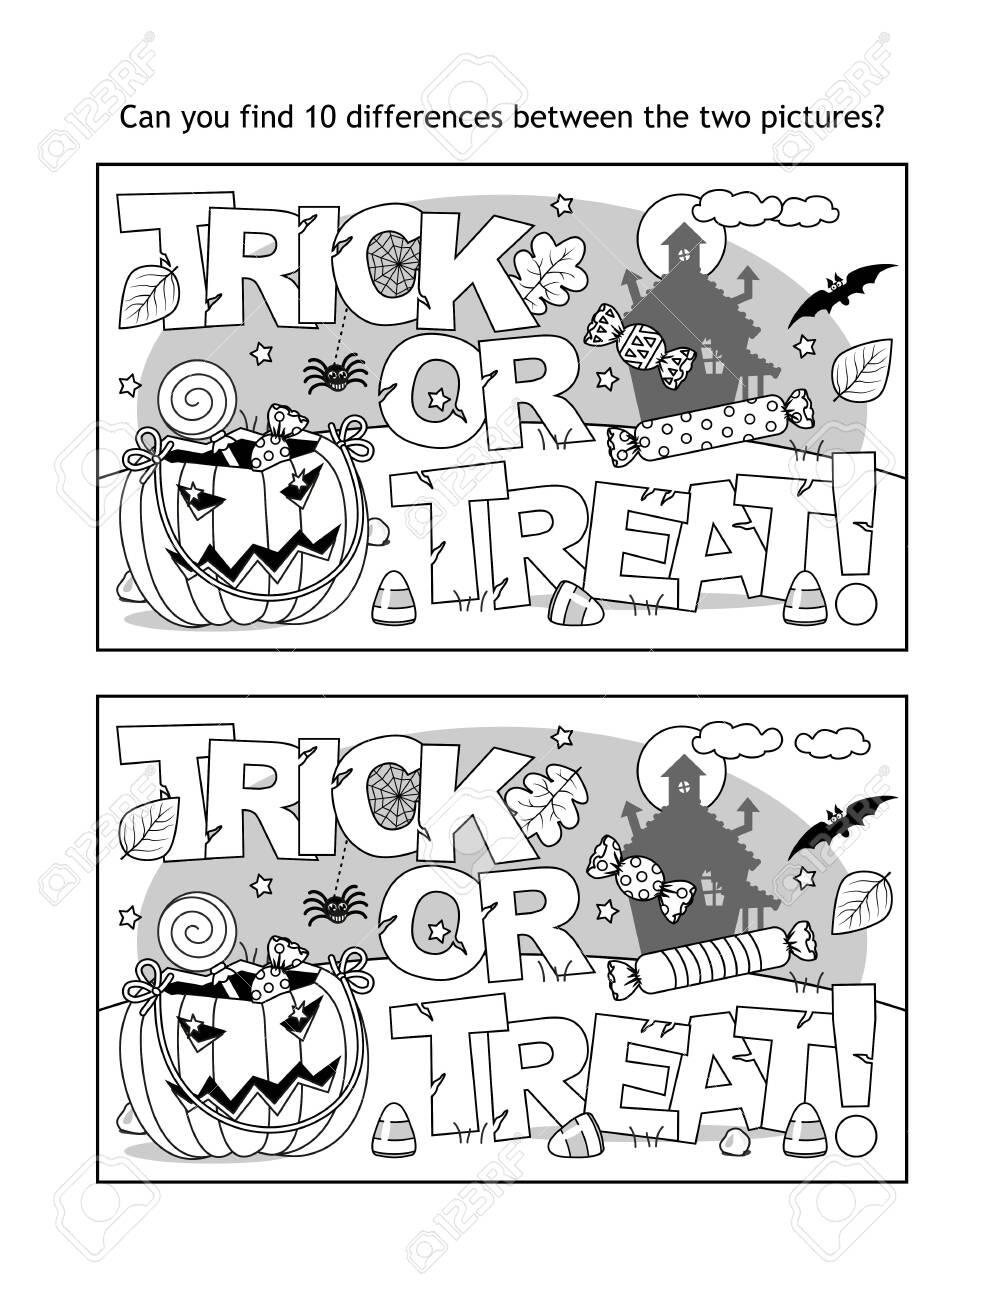 Find differences visual puzzle and coloring page with halloween trick or treat text pumpkin bag candy haunted house bat and spider royalty free svg cliparts vectors and stock illustration image